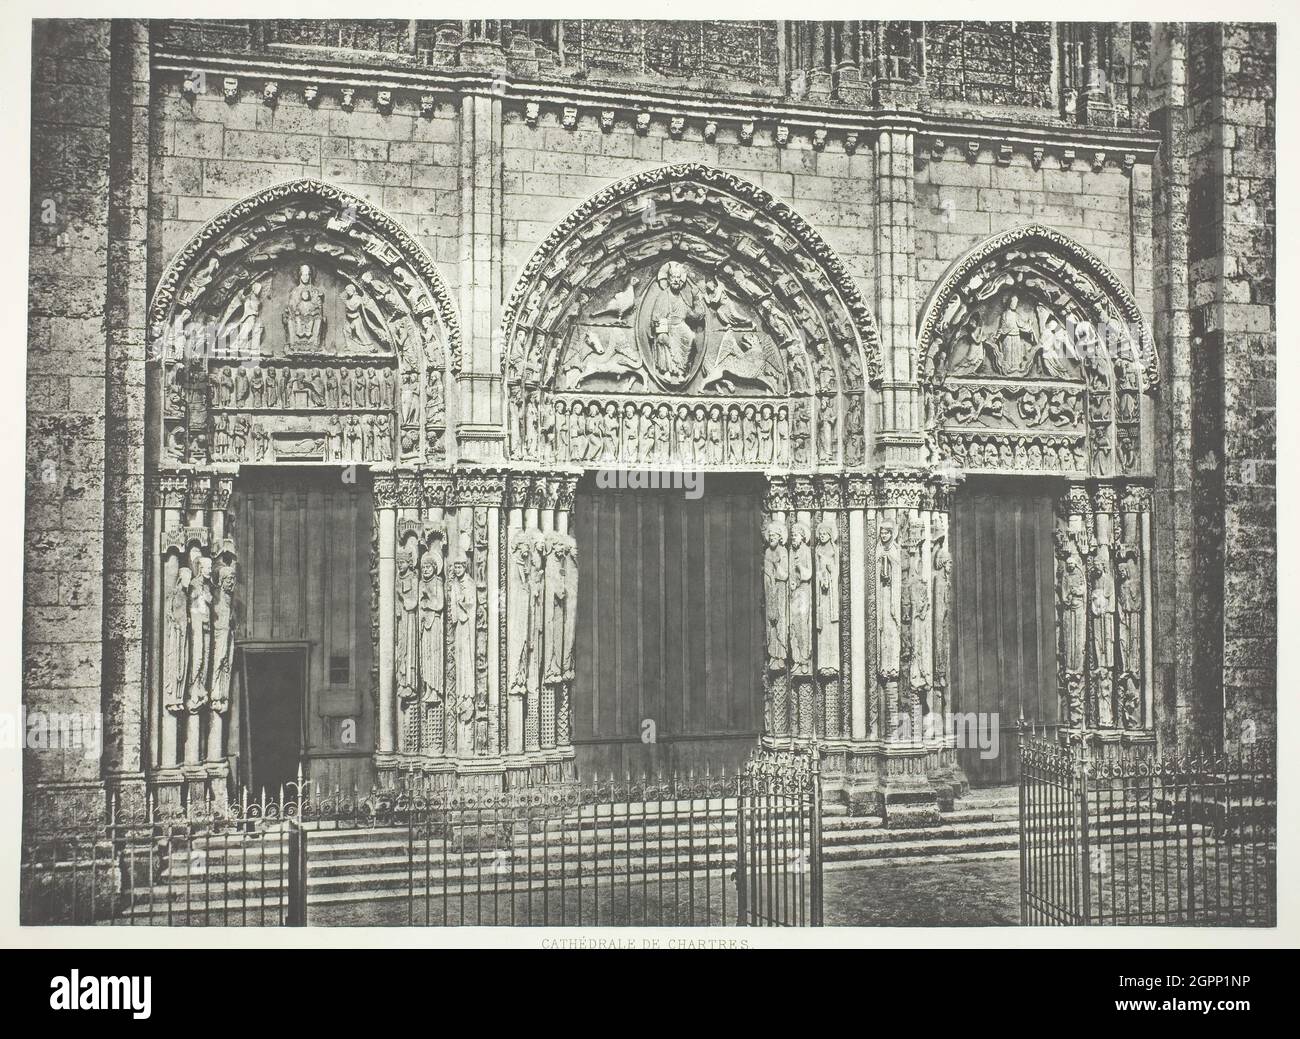 Main Portal, Chartres Cathedral, c. 1860, printed c. 1873. [12th century carving on the facade of the cathedral in Chartres, France]. Heliogravure (photogravure). Stock Photo